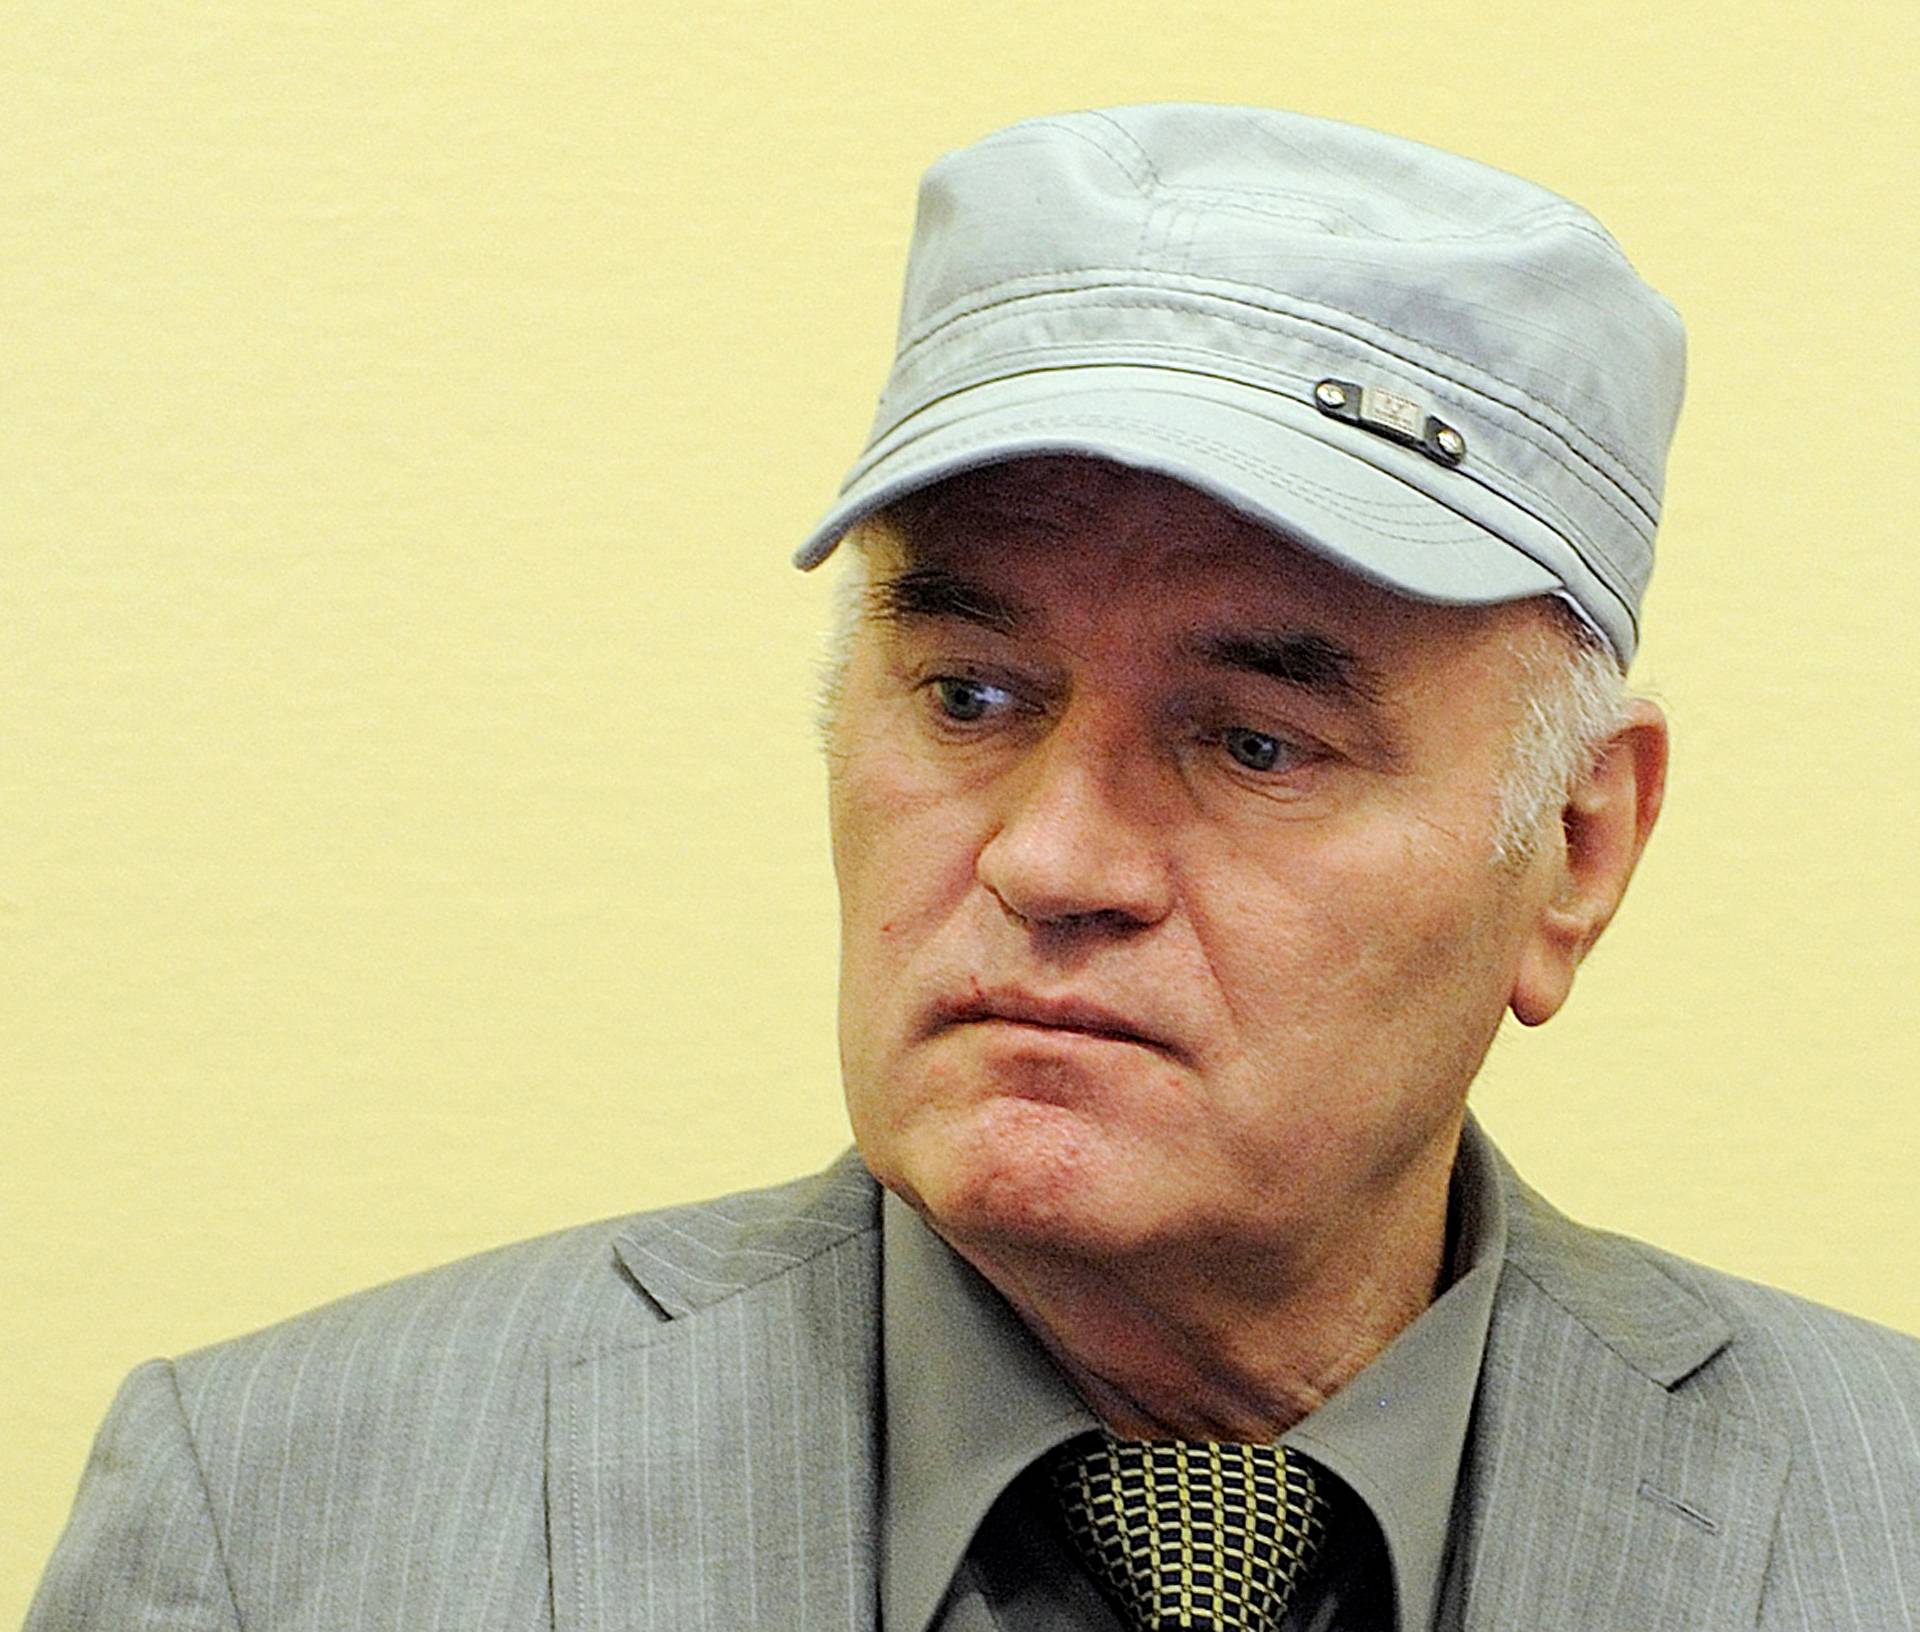 Former Bosnian Serb commander Ratko Mladic appears in court in the Hague